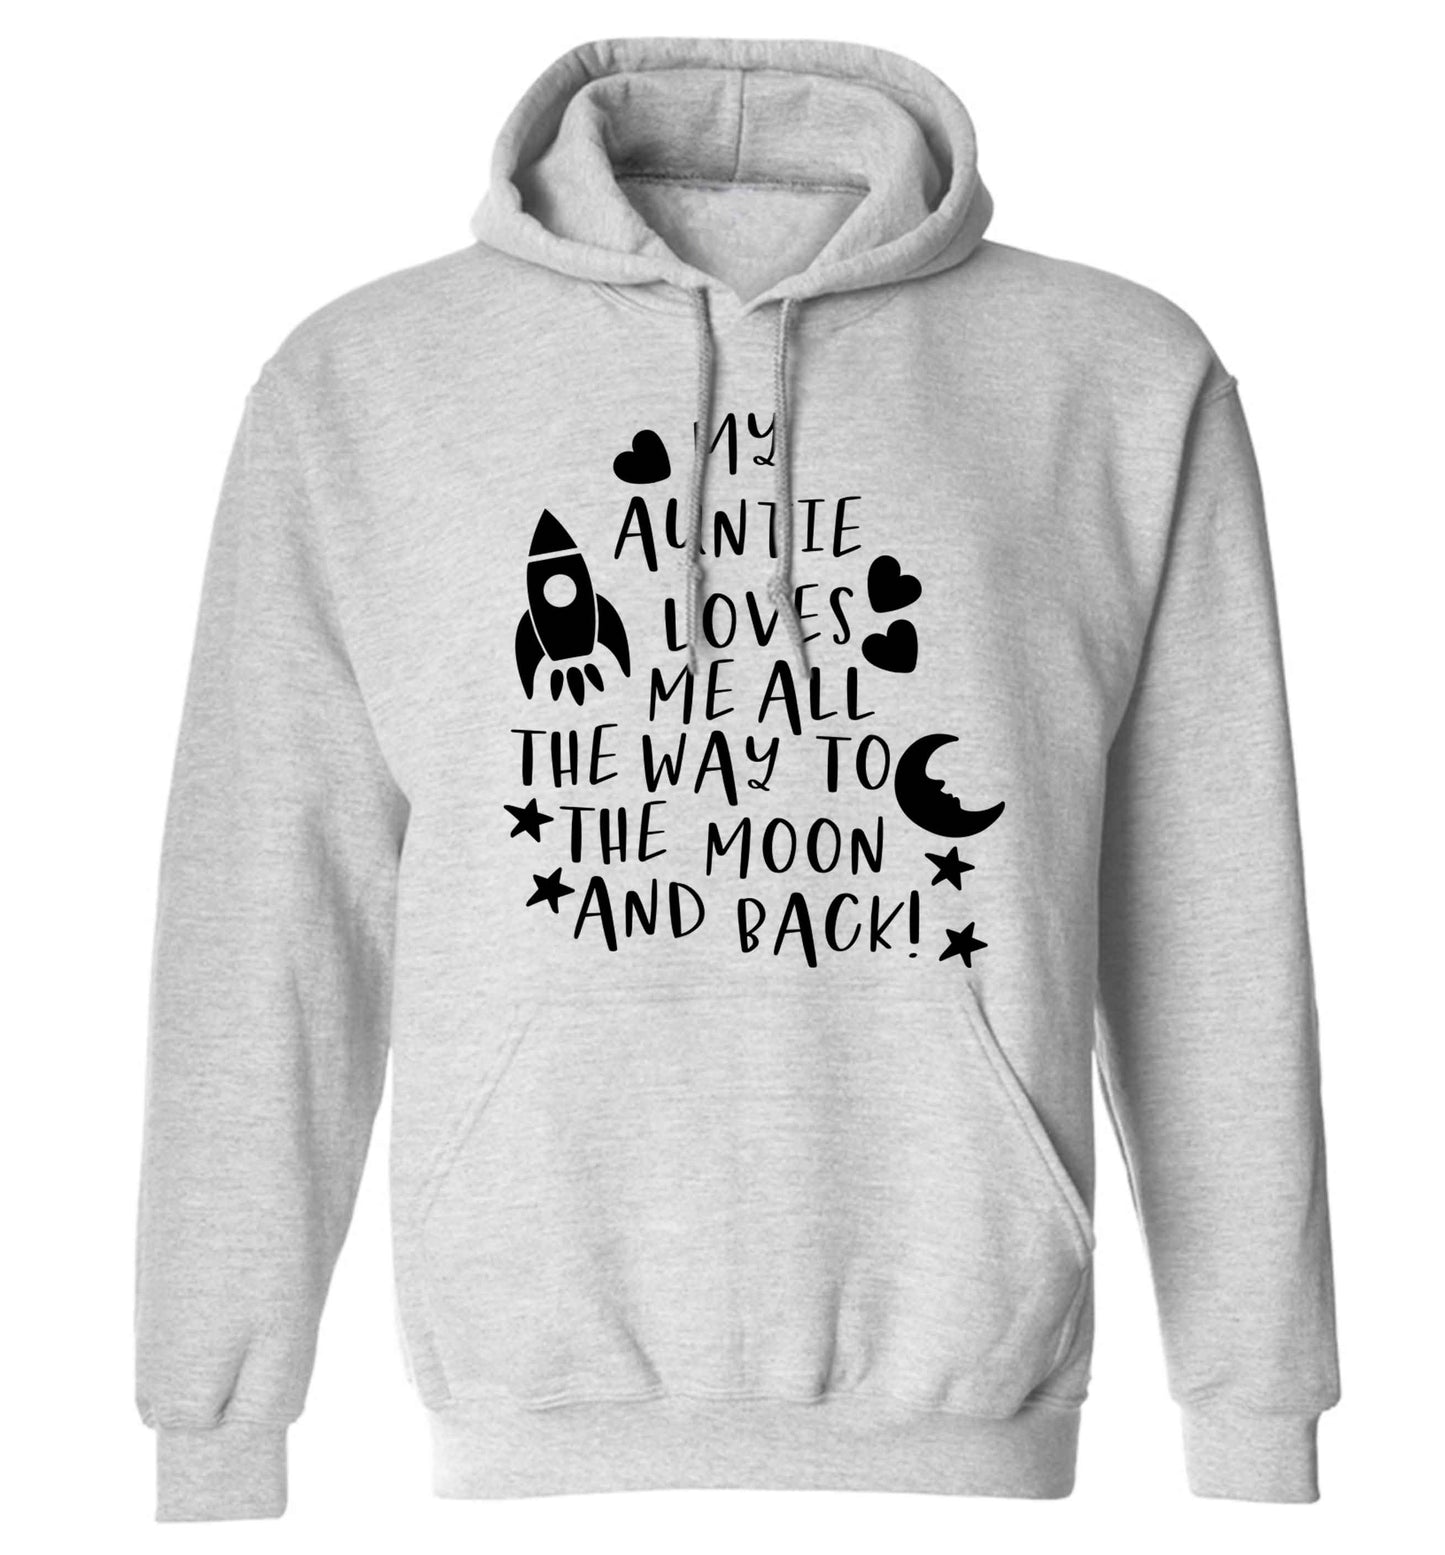 My auntie loves me all the way to the moon and back adults unisex grey hoodie 2XL